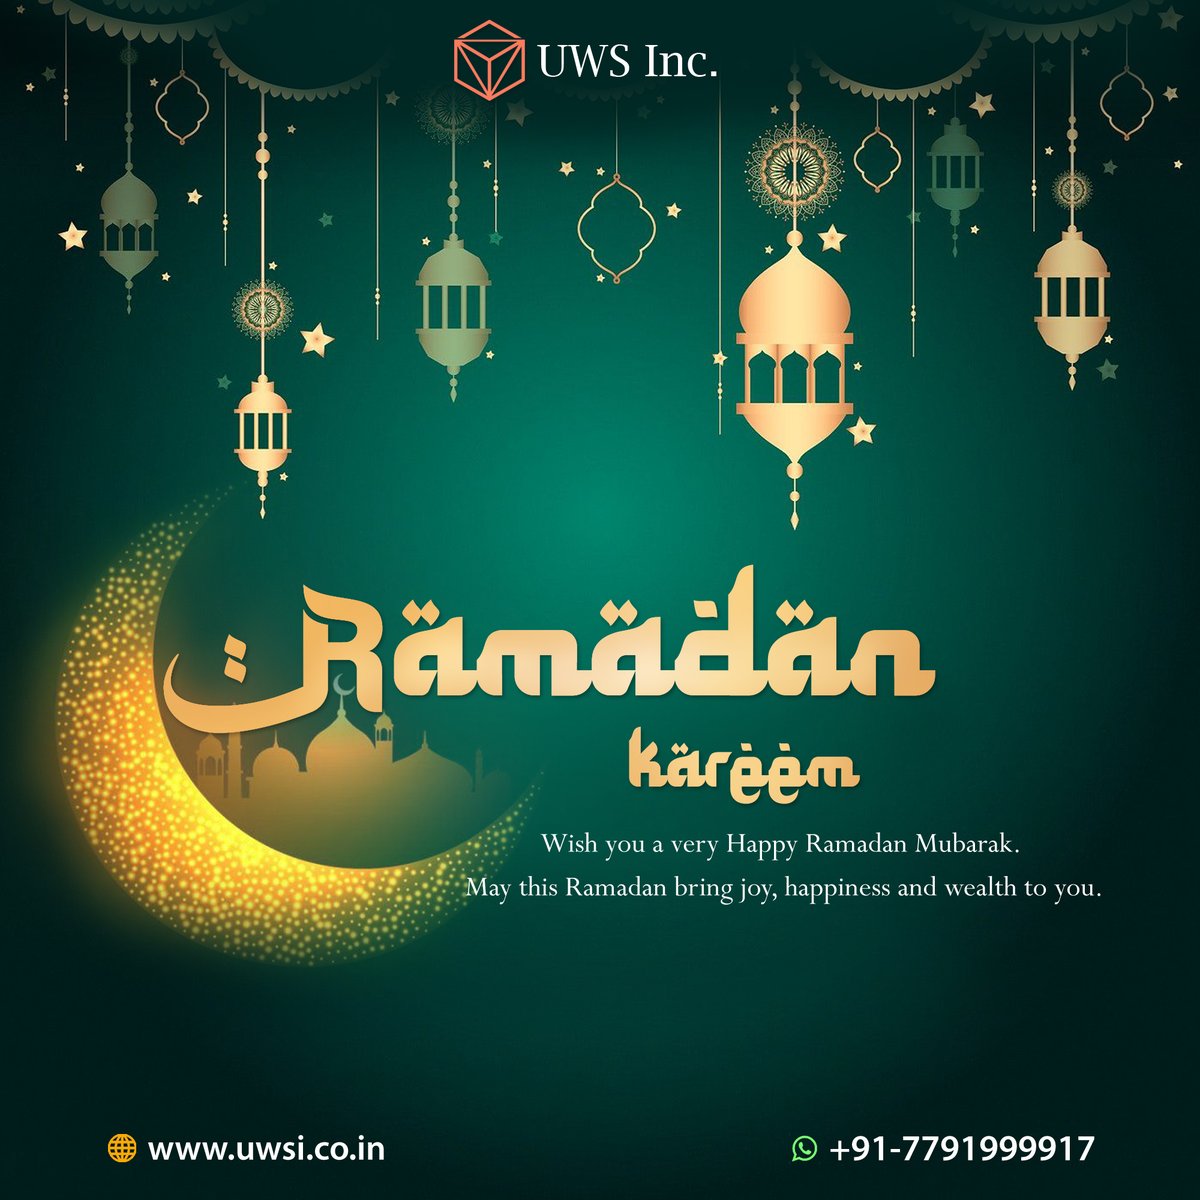 May this holy month bless you and your family with togetherness and happiness and all your good deeds, prayers and devotions get acceptance by Almighty! Ramadan Mubarak to all!🌙🤝🏻🤗

#RamadanMubarak
#RamadanKareem
#Holymonth 
#GoodDeeds
#SpreadJoyandHappiness